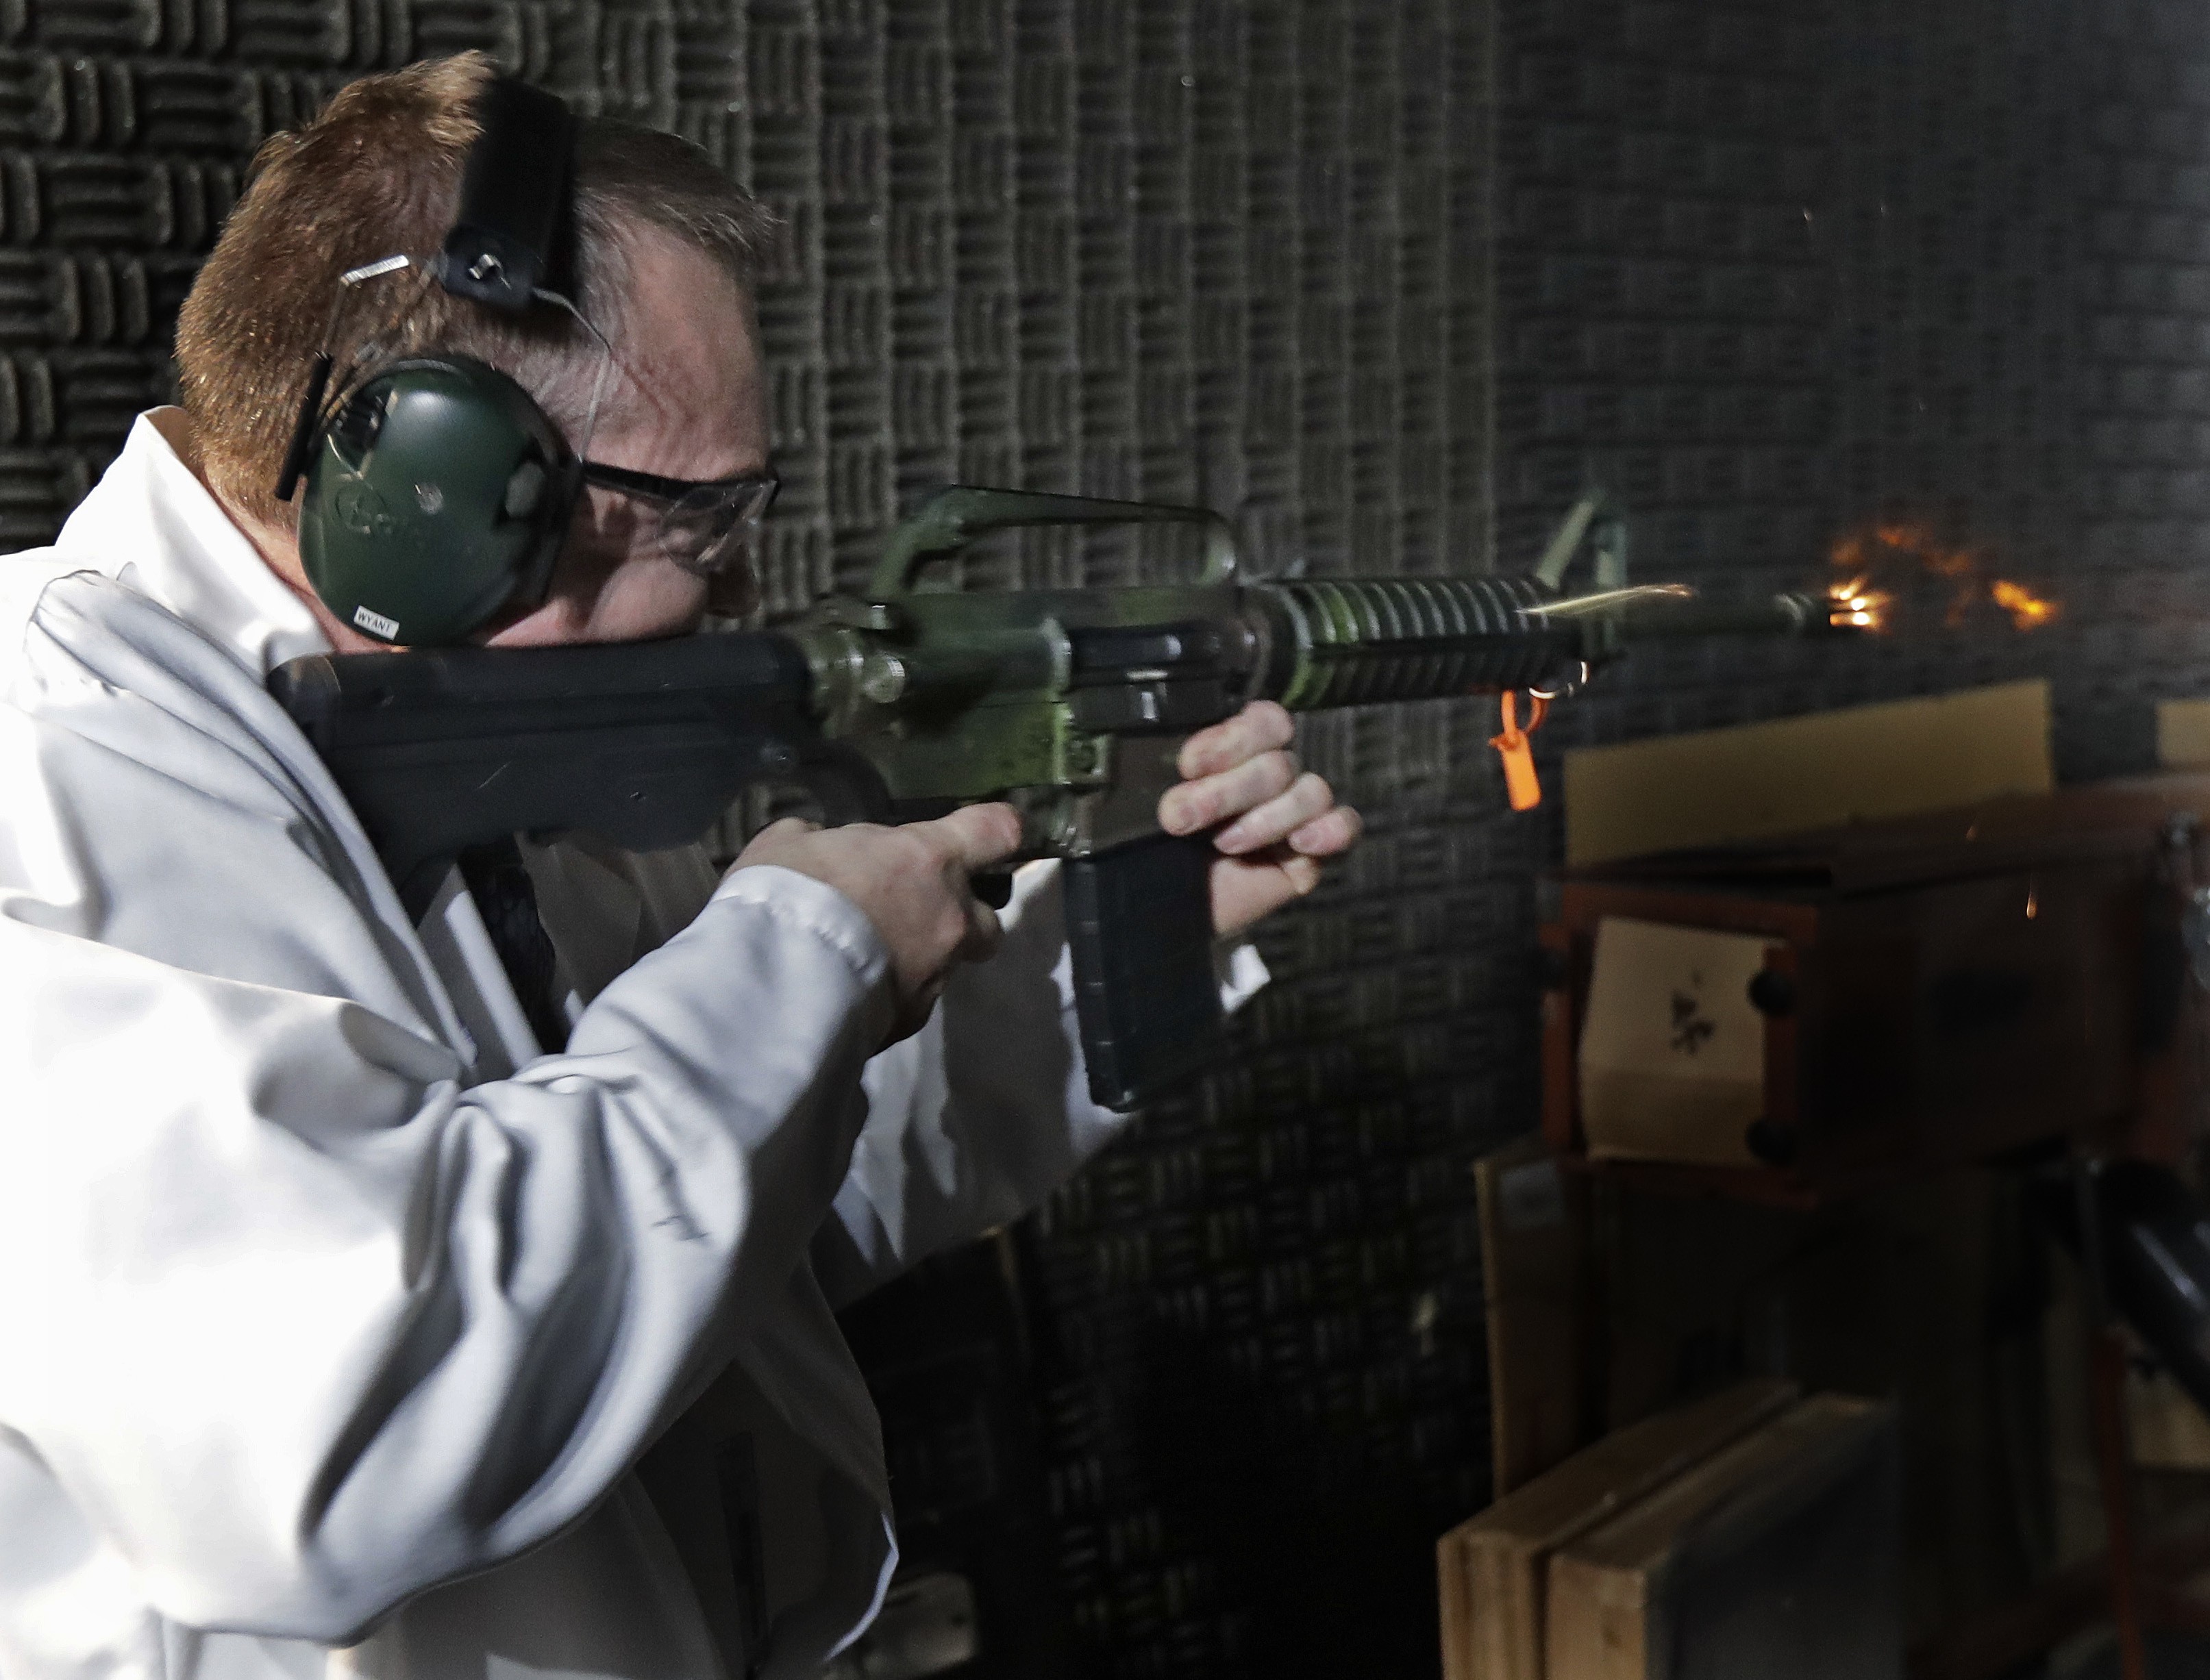 In this January 11, 2018 photo, Washington Rick Wyant, supervisor of the forensic firearms unit at the Washington state Patrol crime laboratory in Seattle, test fires a semi-automatic rifle that has been fitted with a so-called bump stock device to make it fire faster. Photo: AP